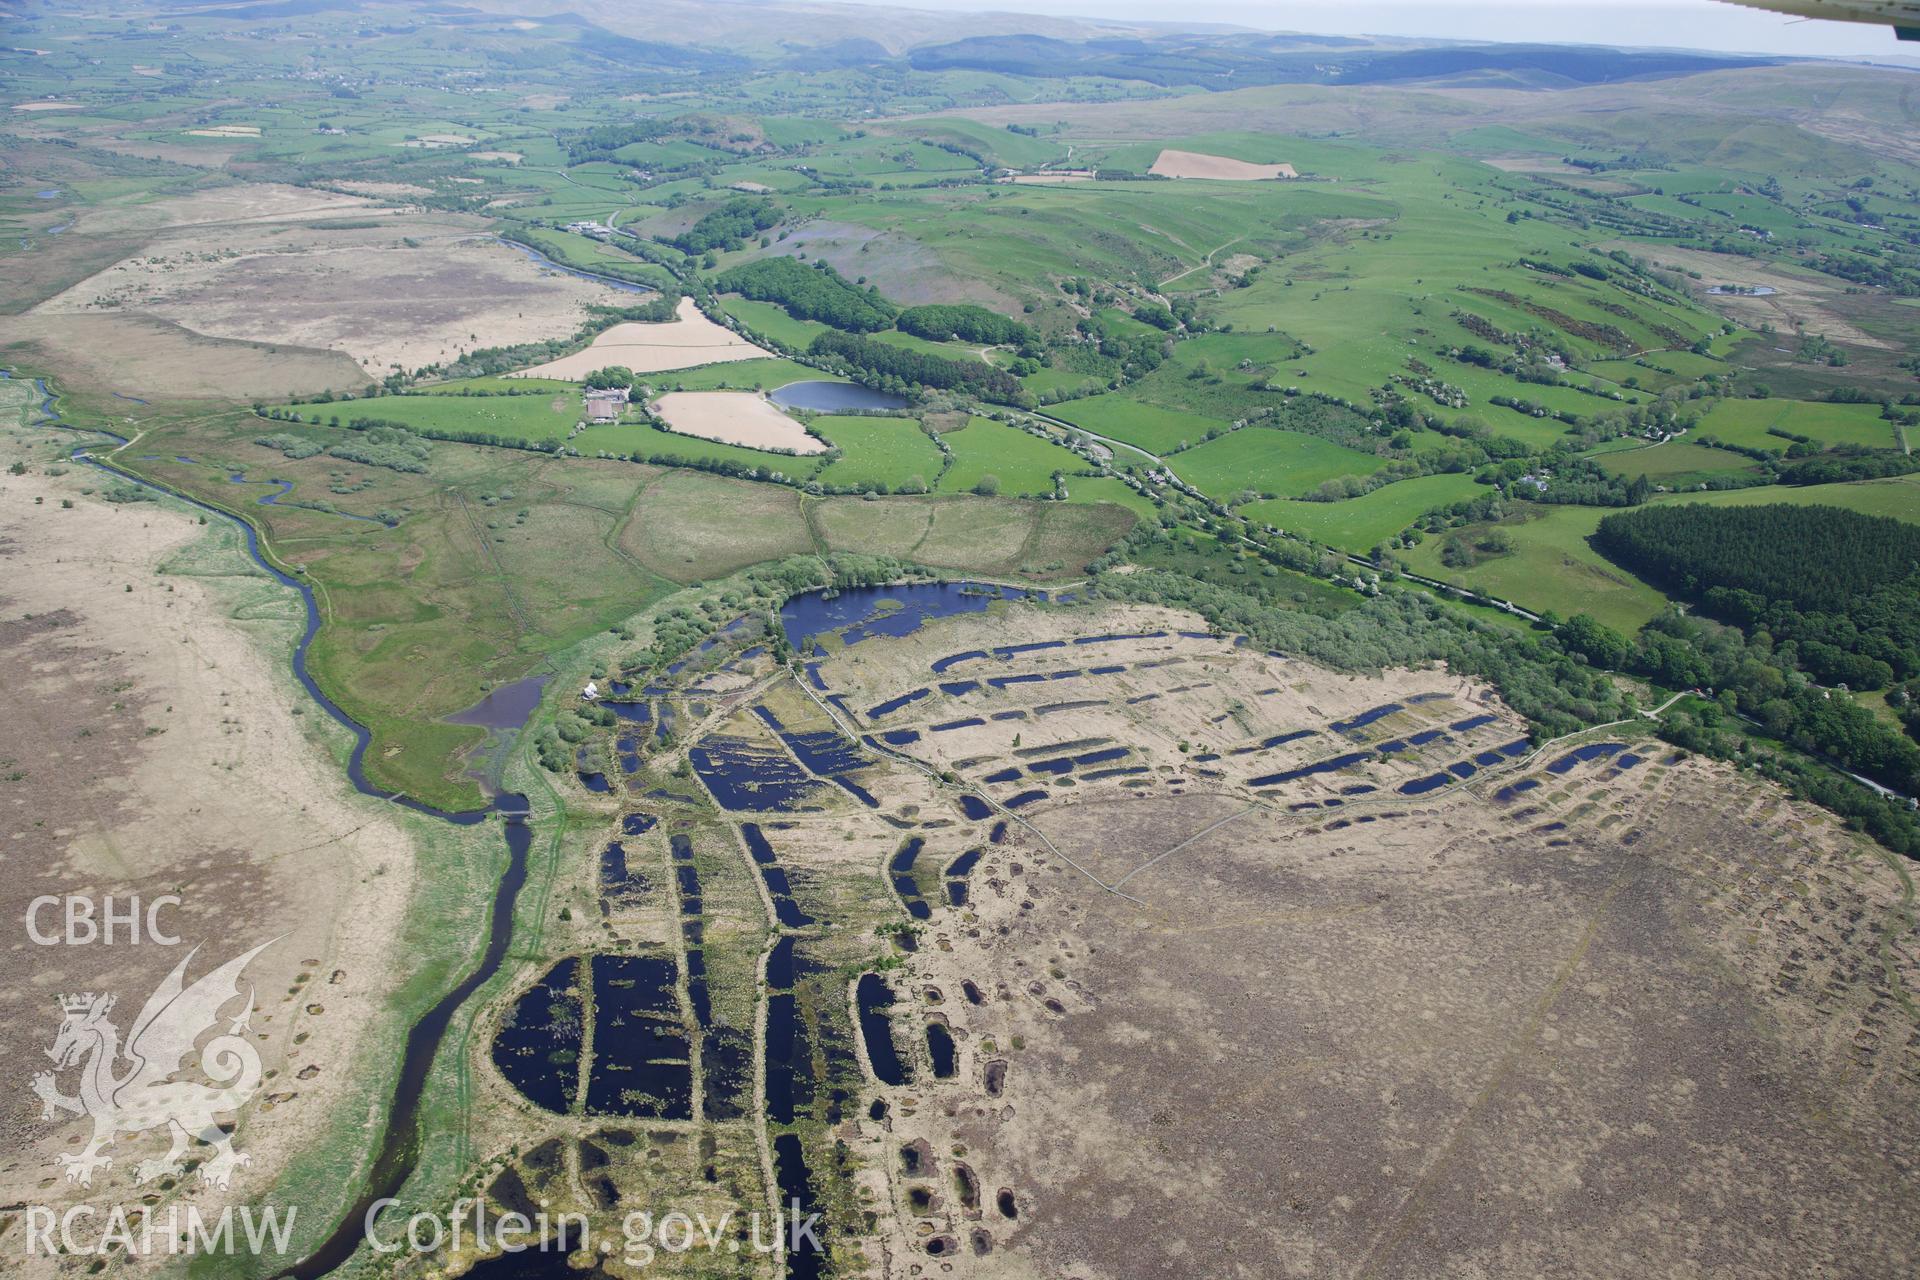 RCAHMW colour oblique photograph of Long View of Cors Caron. Taken by Toby Driver on 28/05/2012.